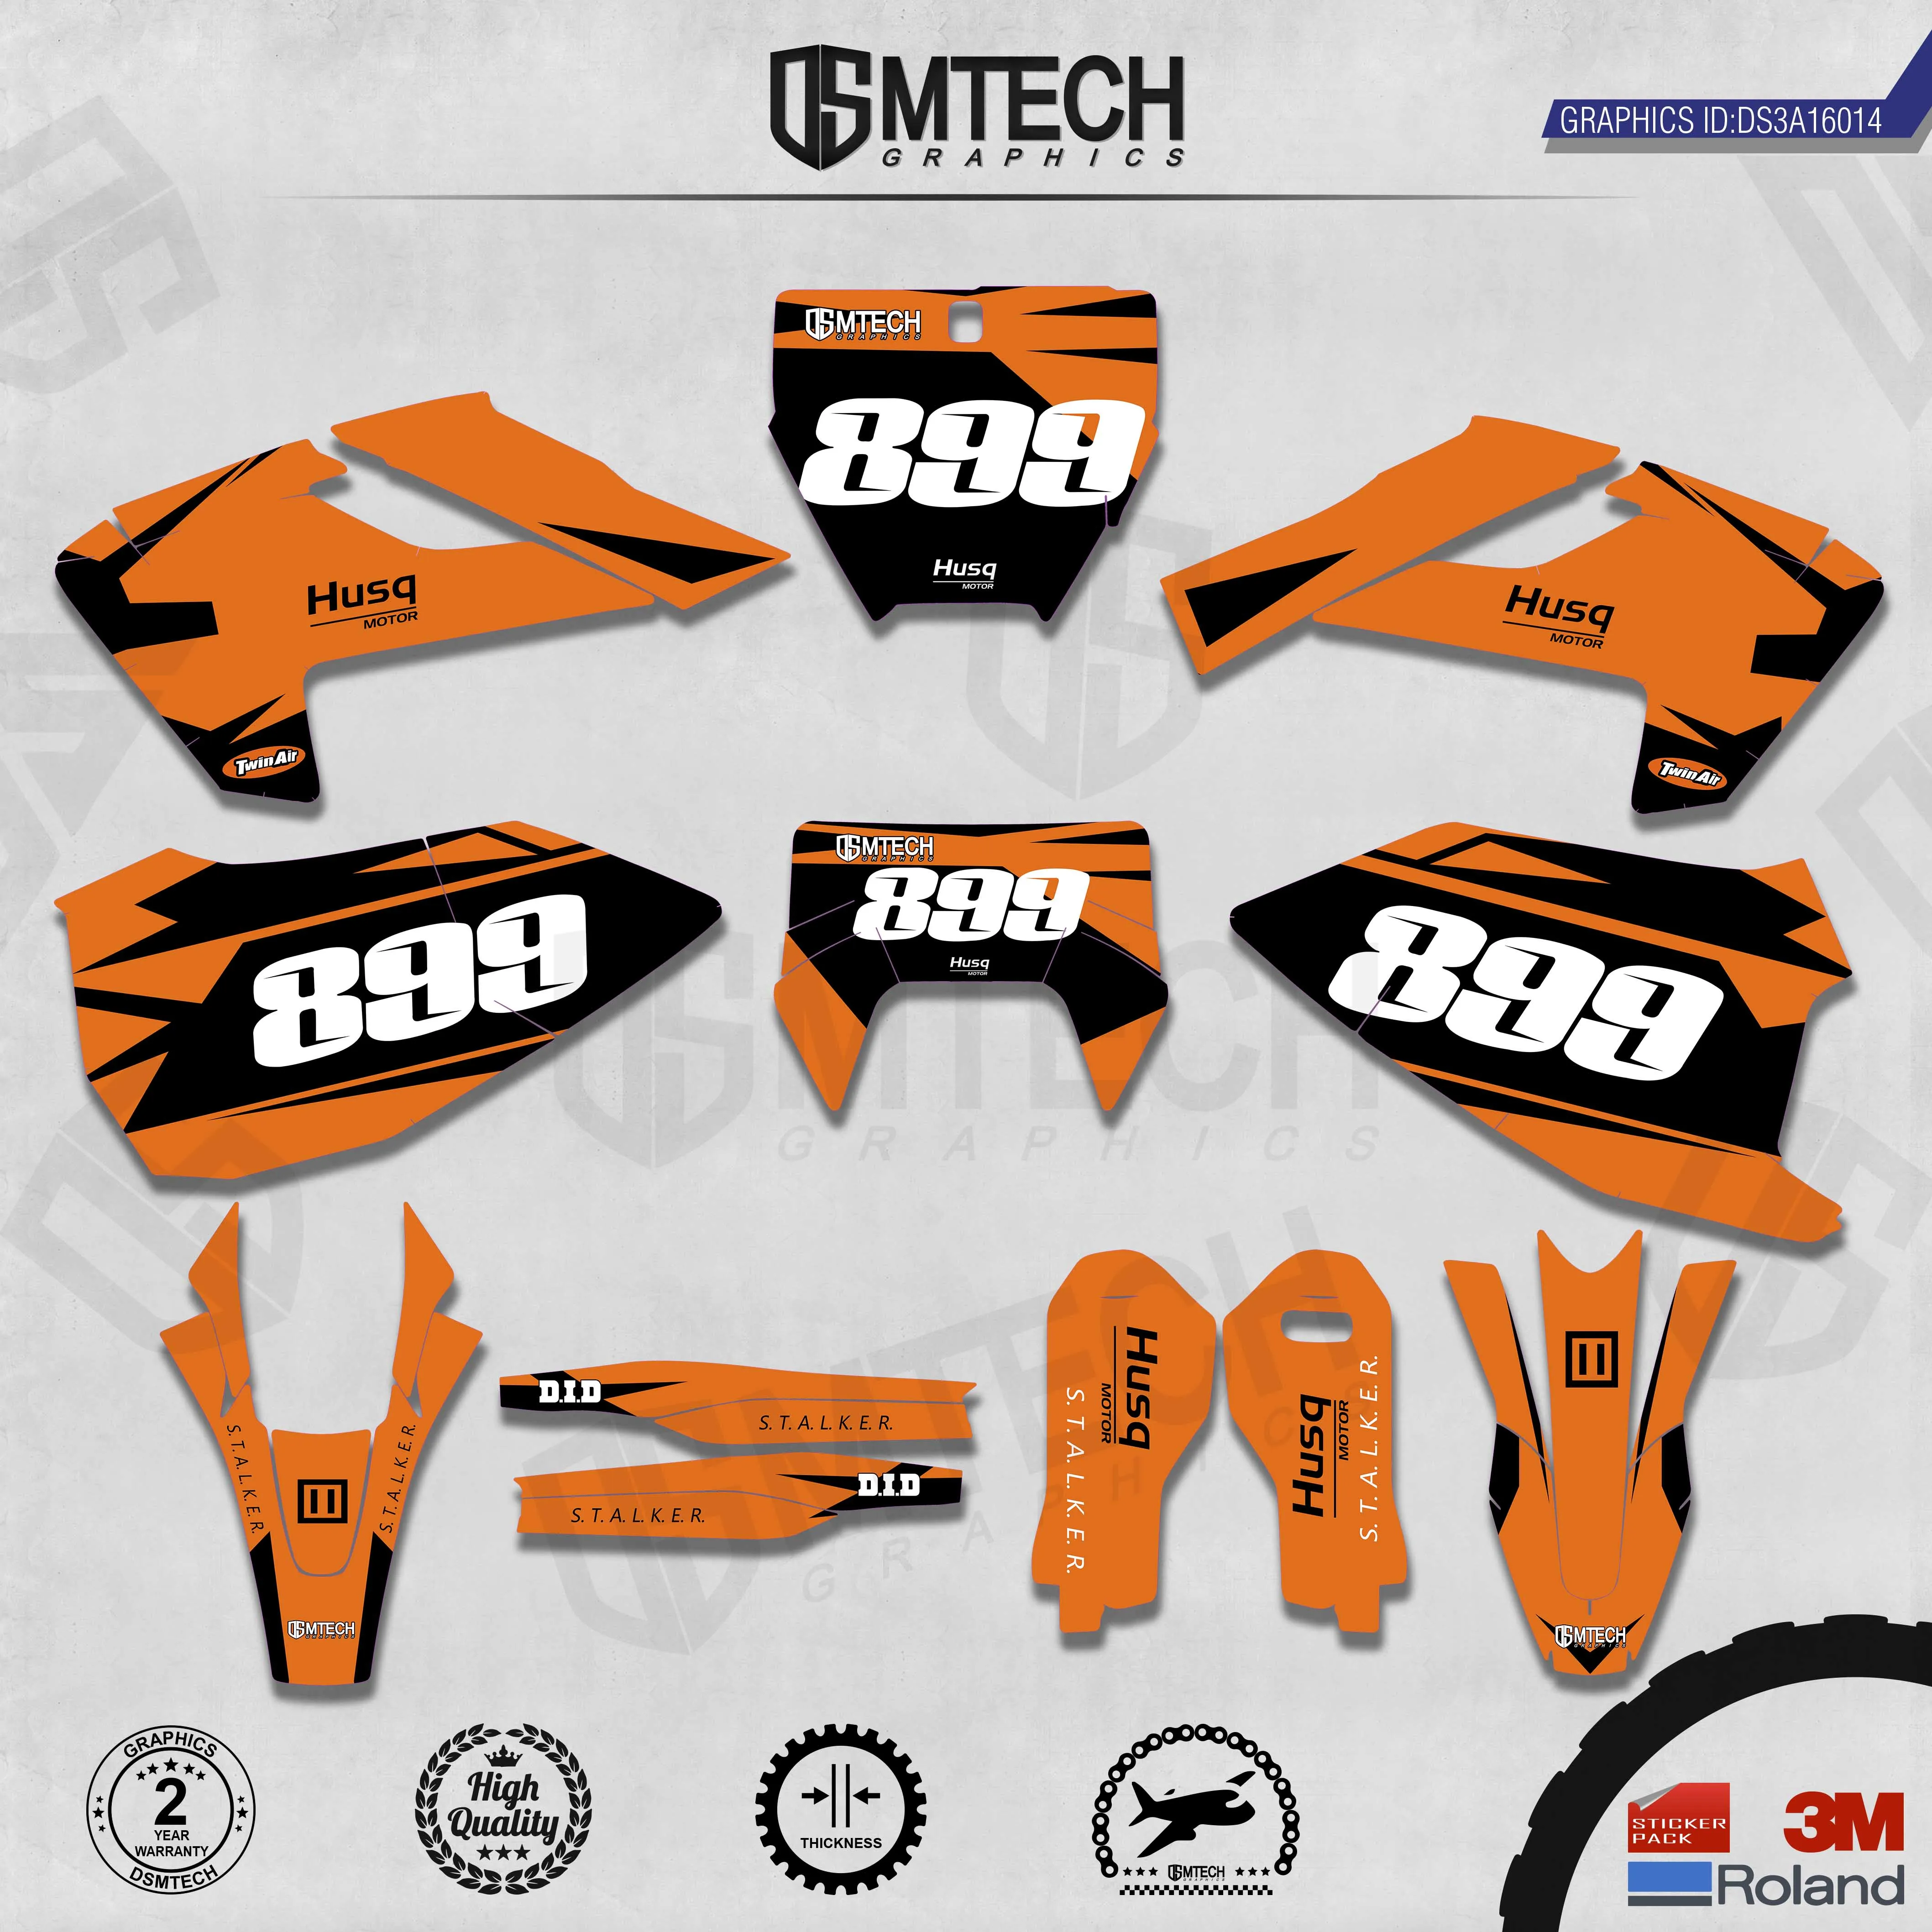 dsmtech-customized-team-graphics-backgrounds-decals-3m-custom-stickers-for-tc-fc-tx-fx-fs-2016-2018-te-fe-2017-2019-014